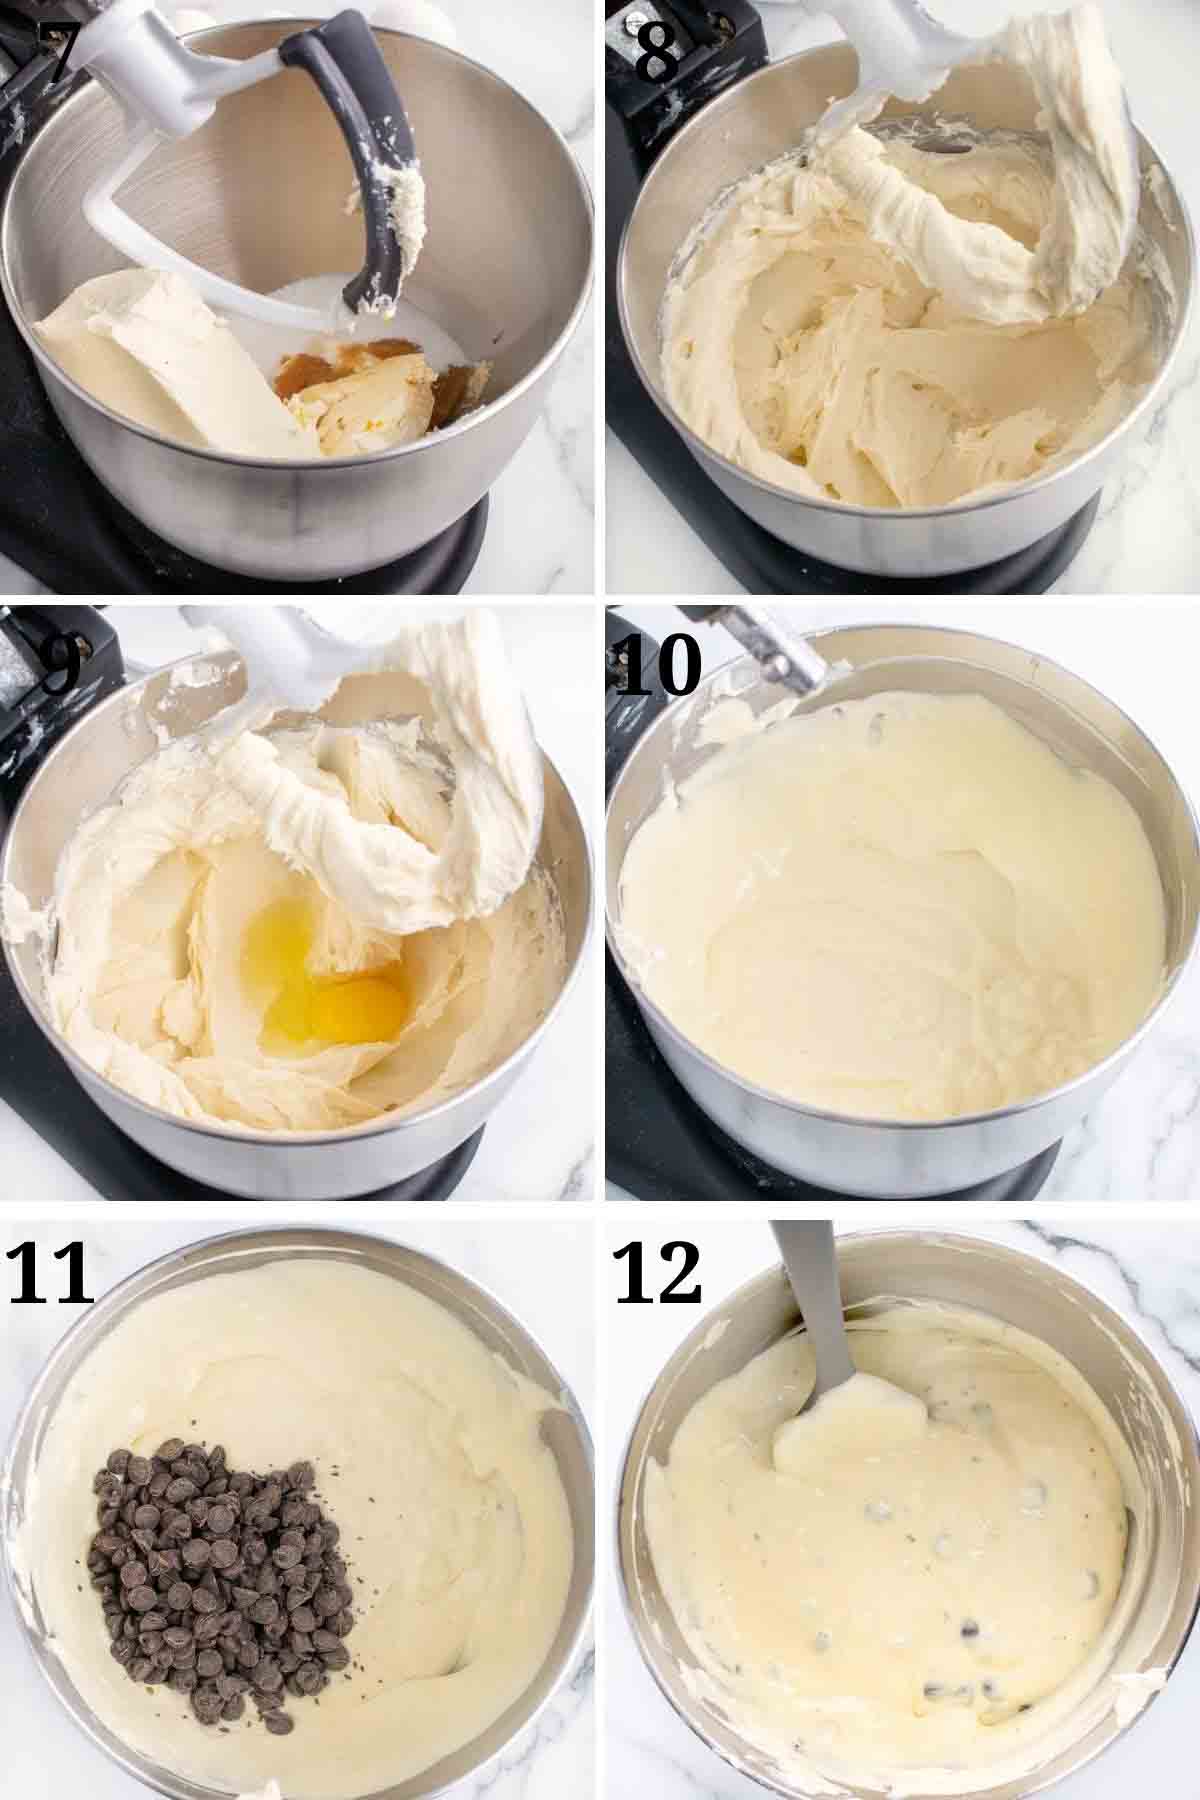 six images showing how to make the cheesecake filling